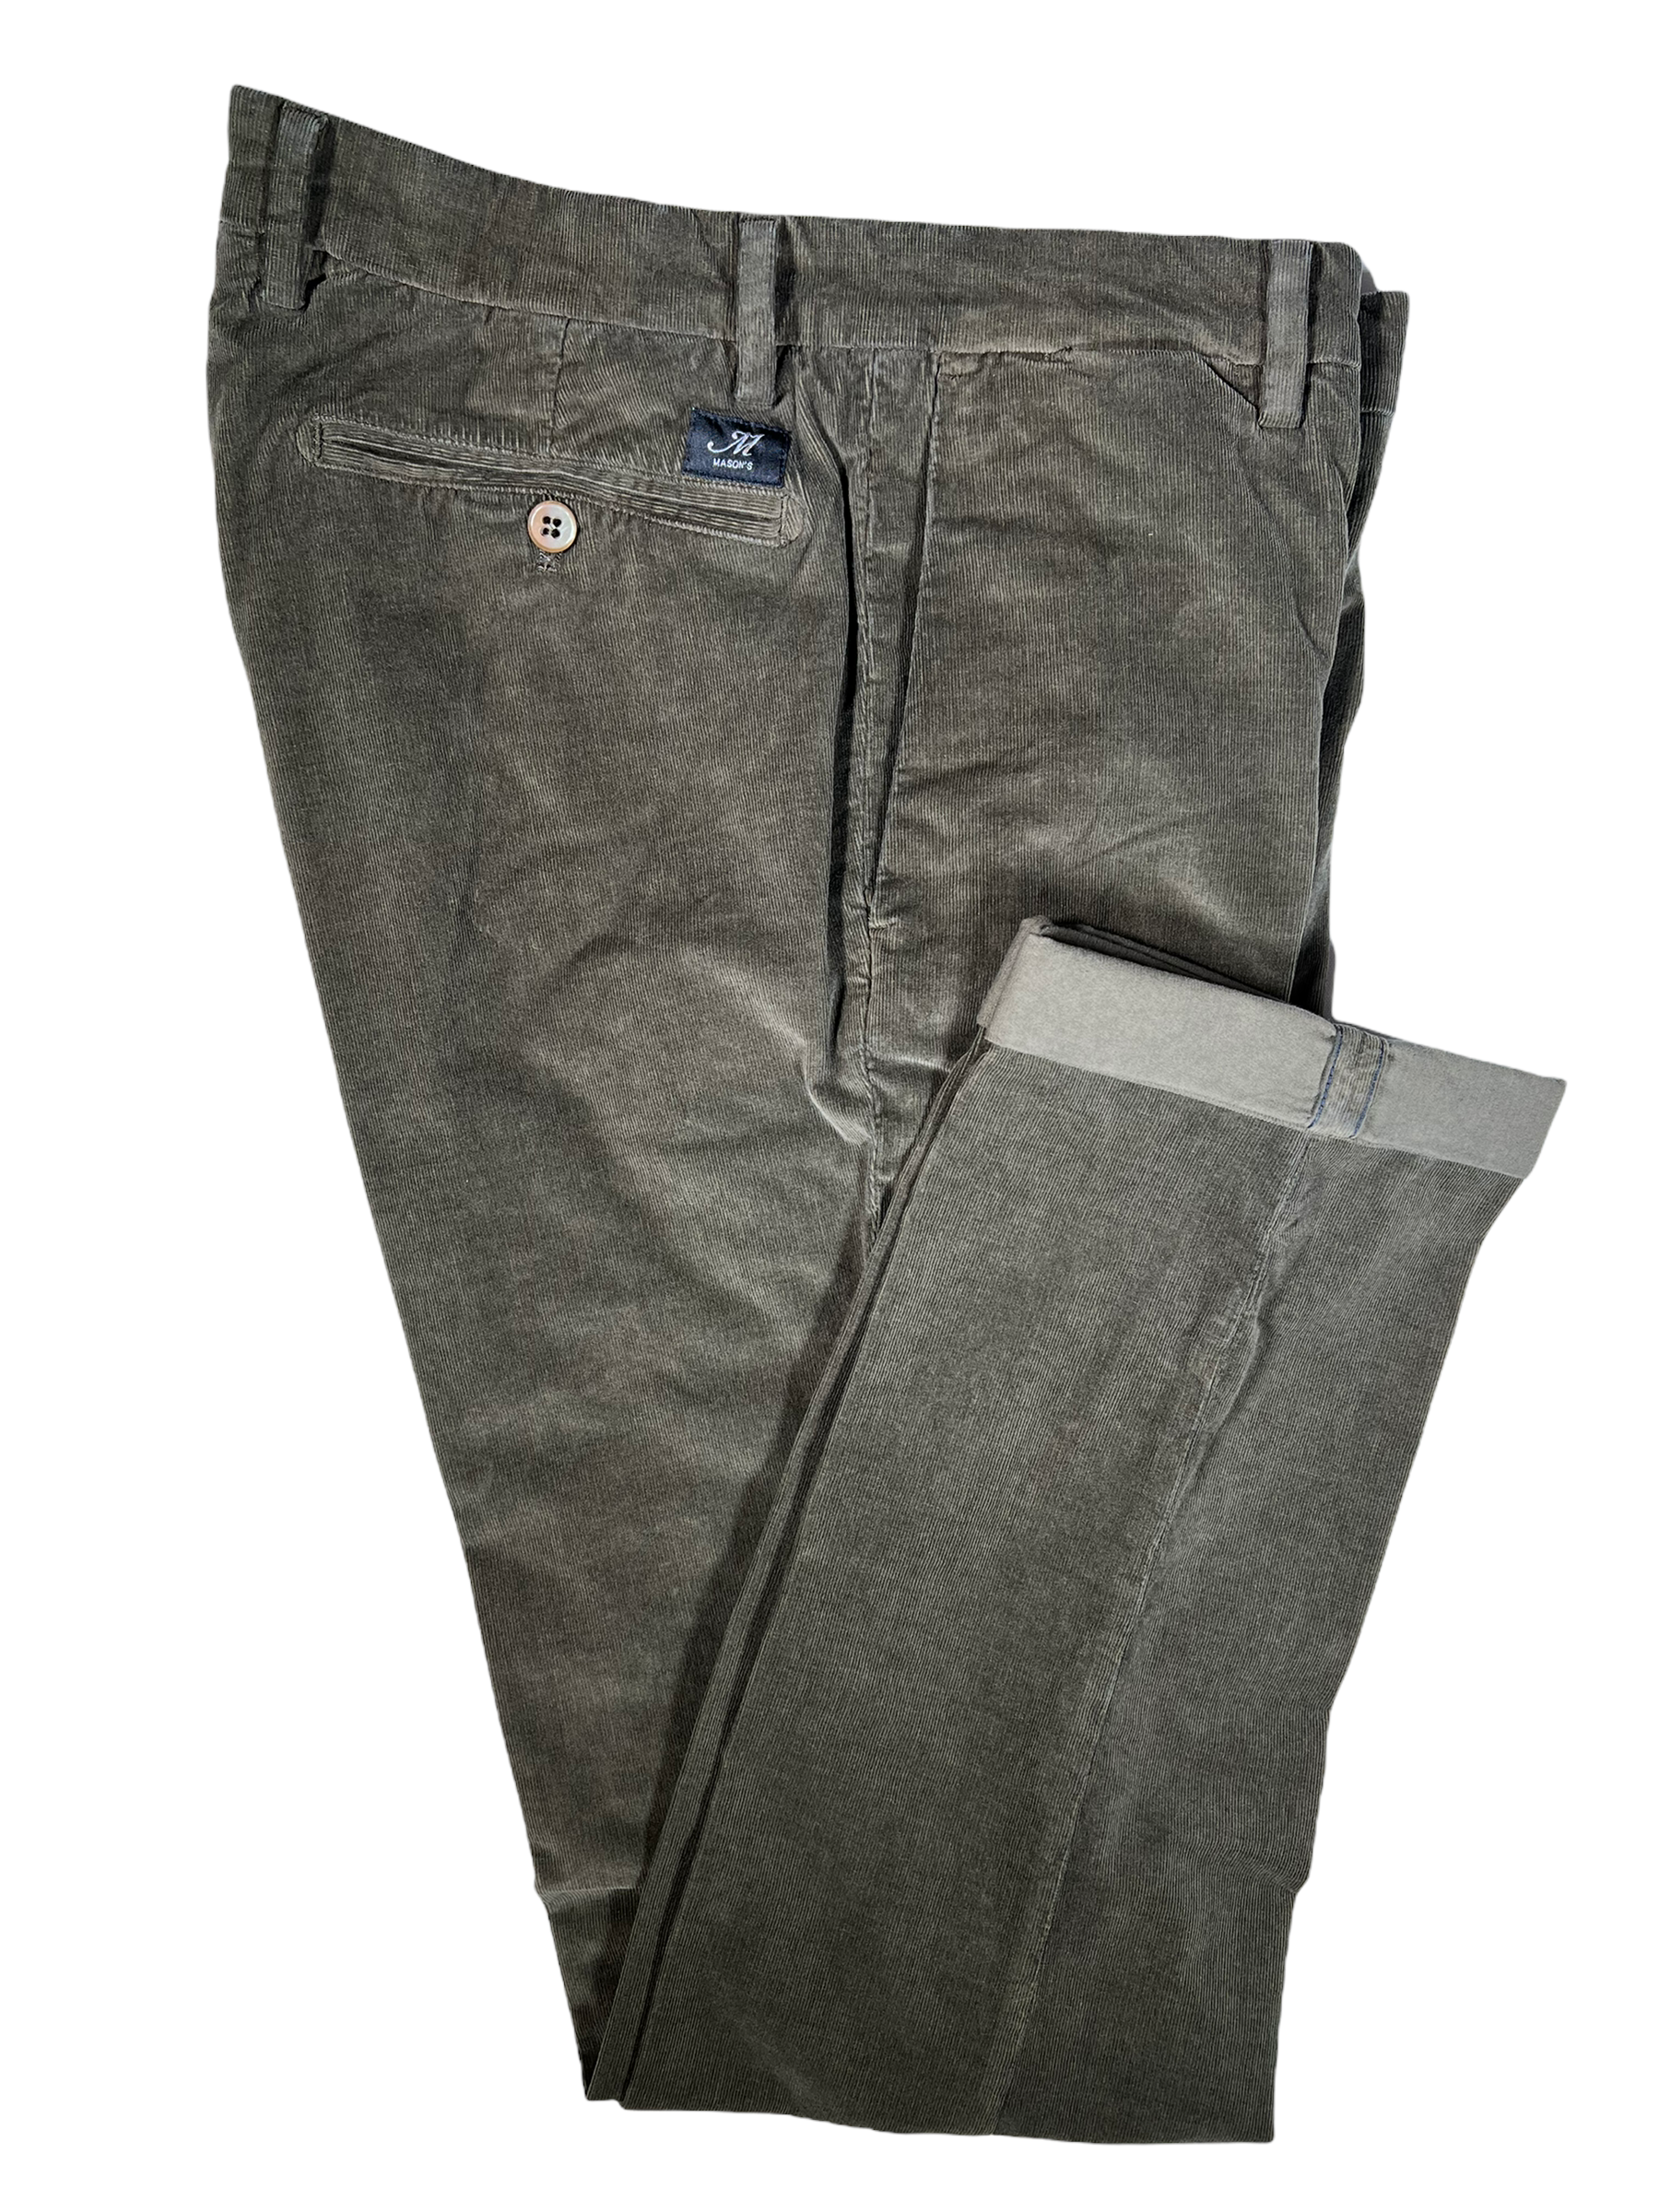 Oeko Tex Certified Mens Pleated Trousers - Men's Linen, Corduroy, Stretch,  Athletic Pants at Rs 850 | Trouser Pants for Men in Erode | ID:  2850661360273